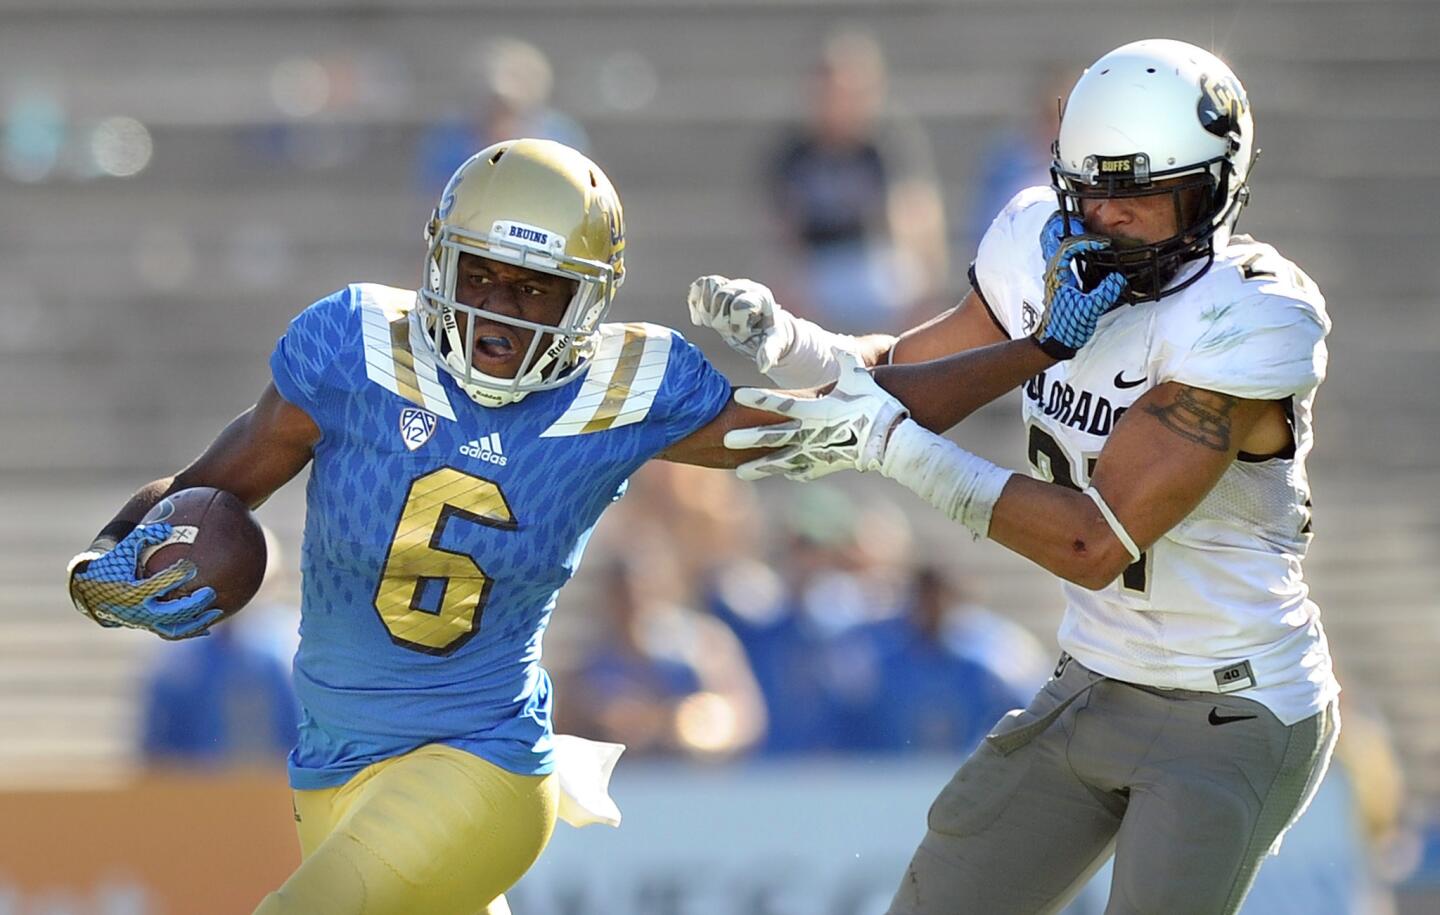 Healthier UCLA to face injury-riddled Oregon State, likely in the rain